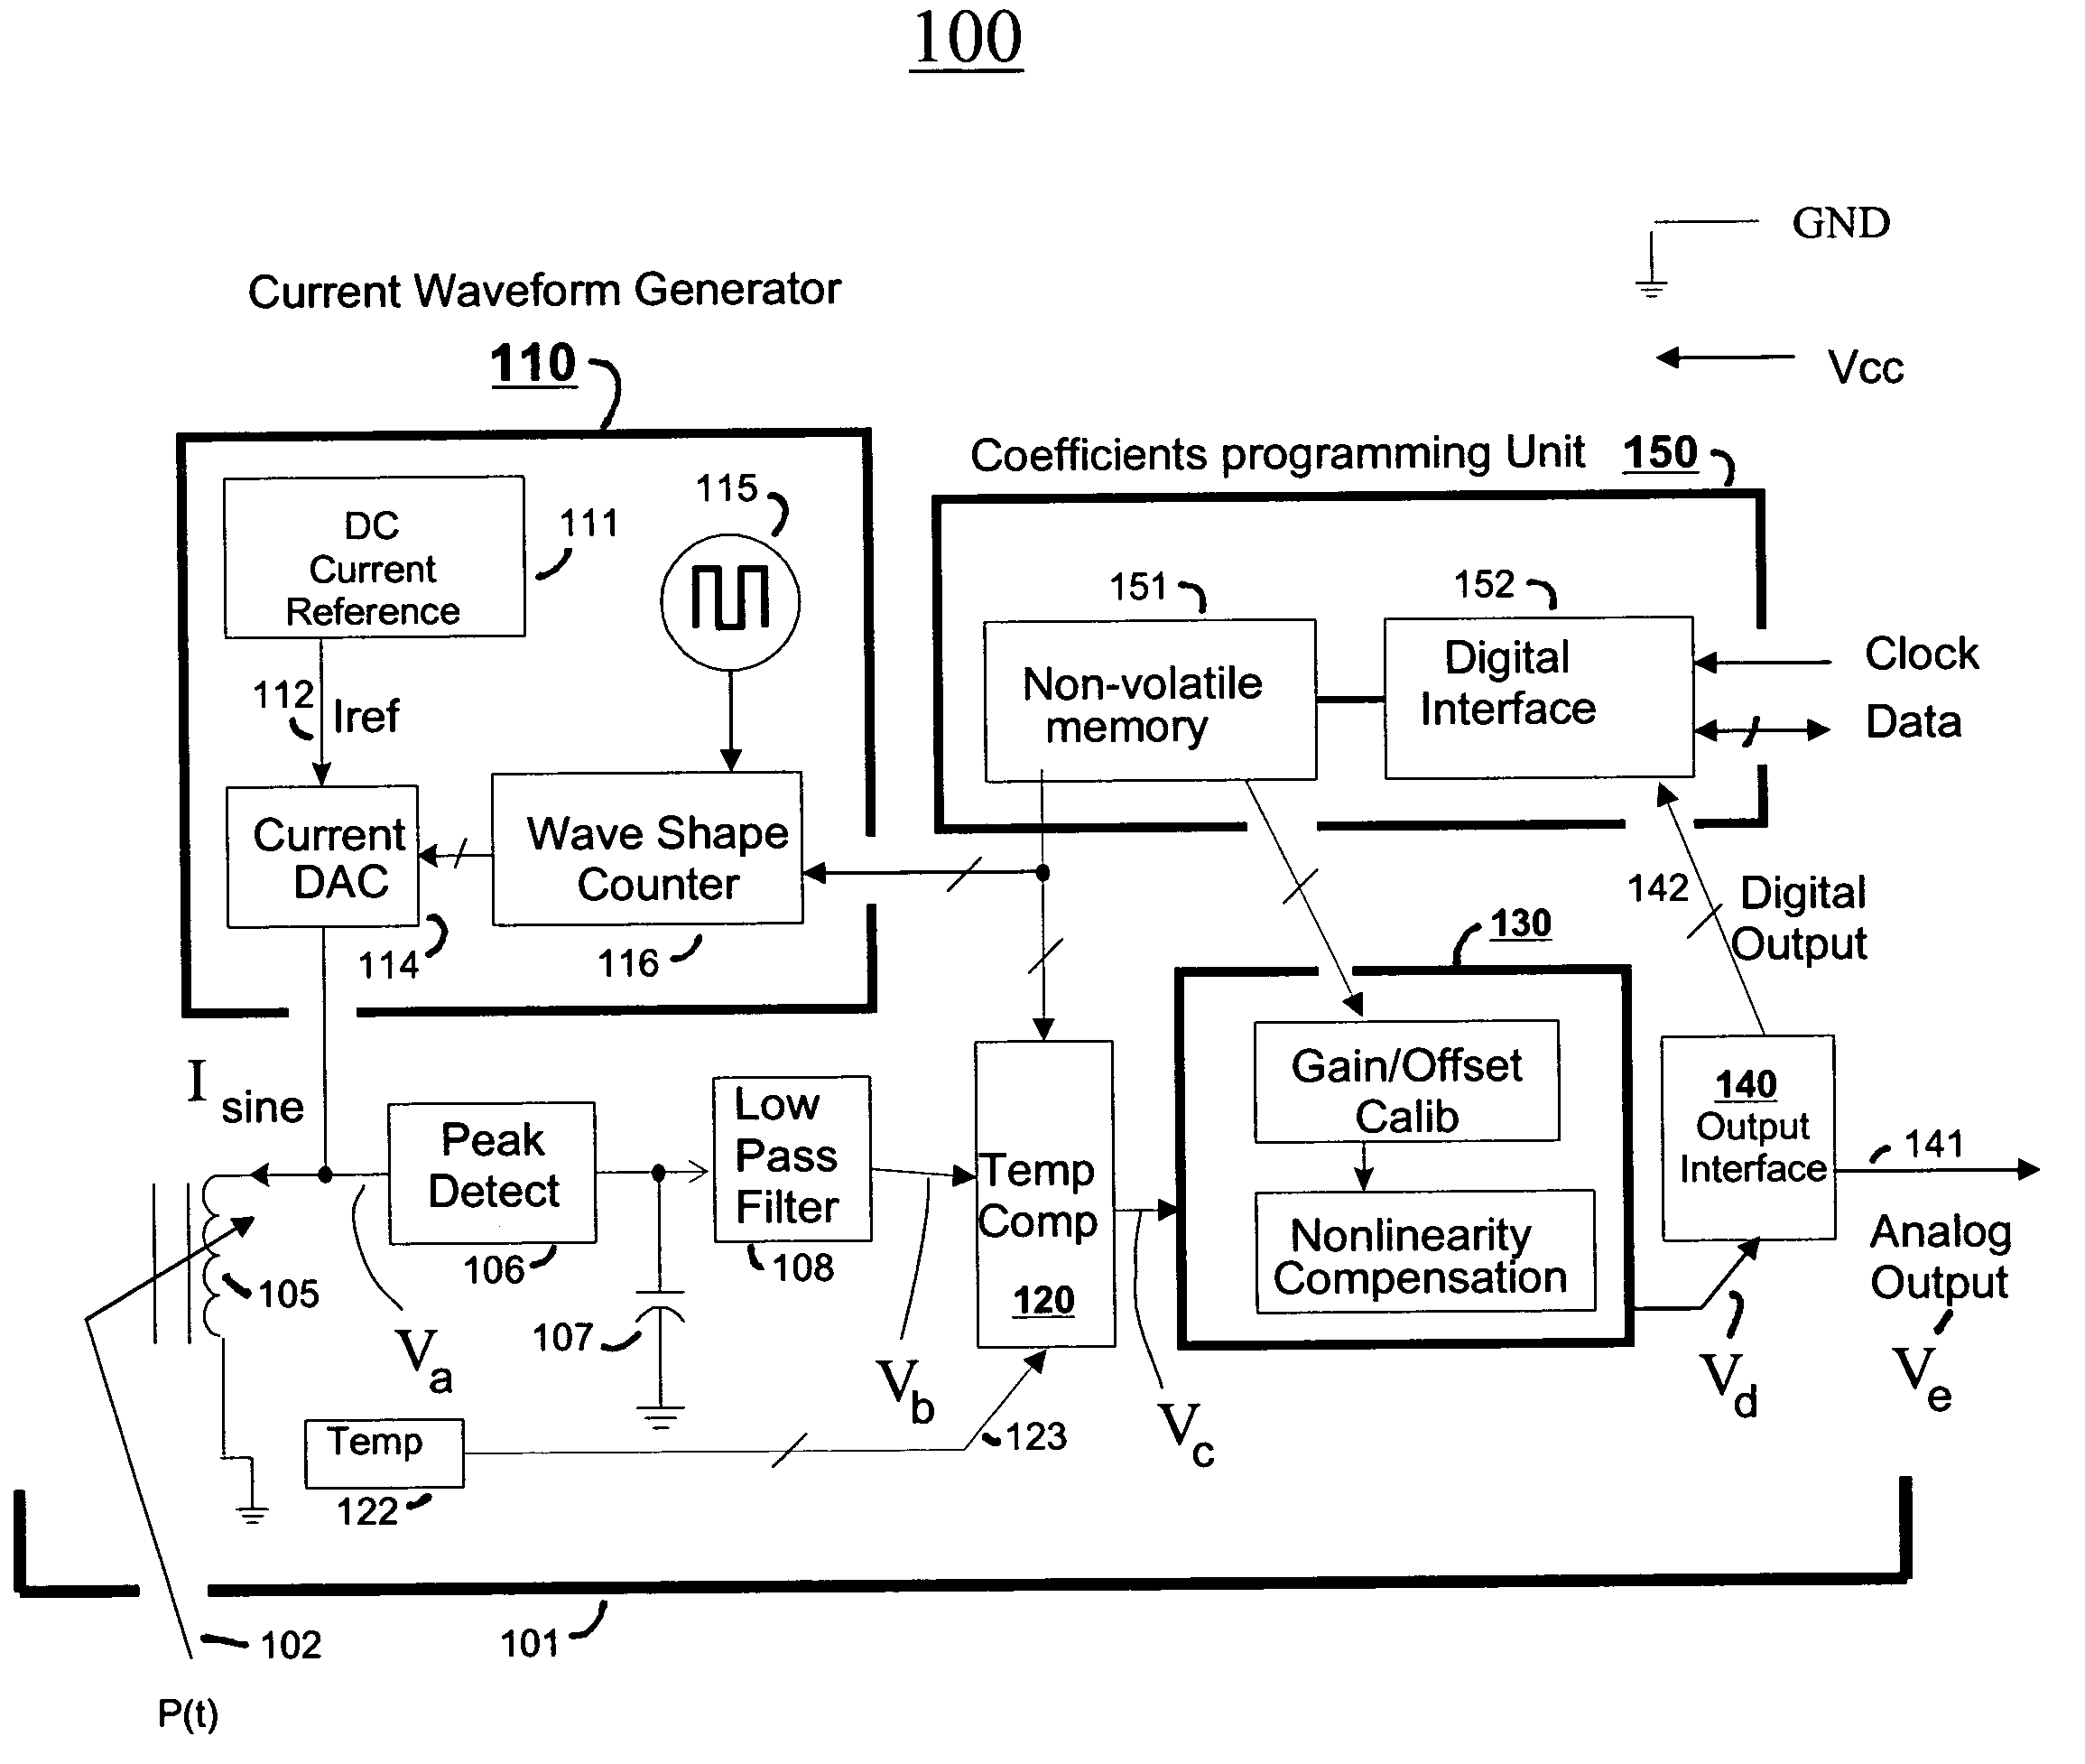 Reactive sensor modules using Pade' Approximant based compensation and providing module-sourced excitation